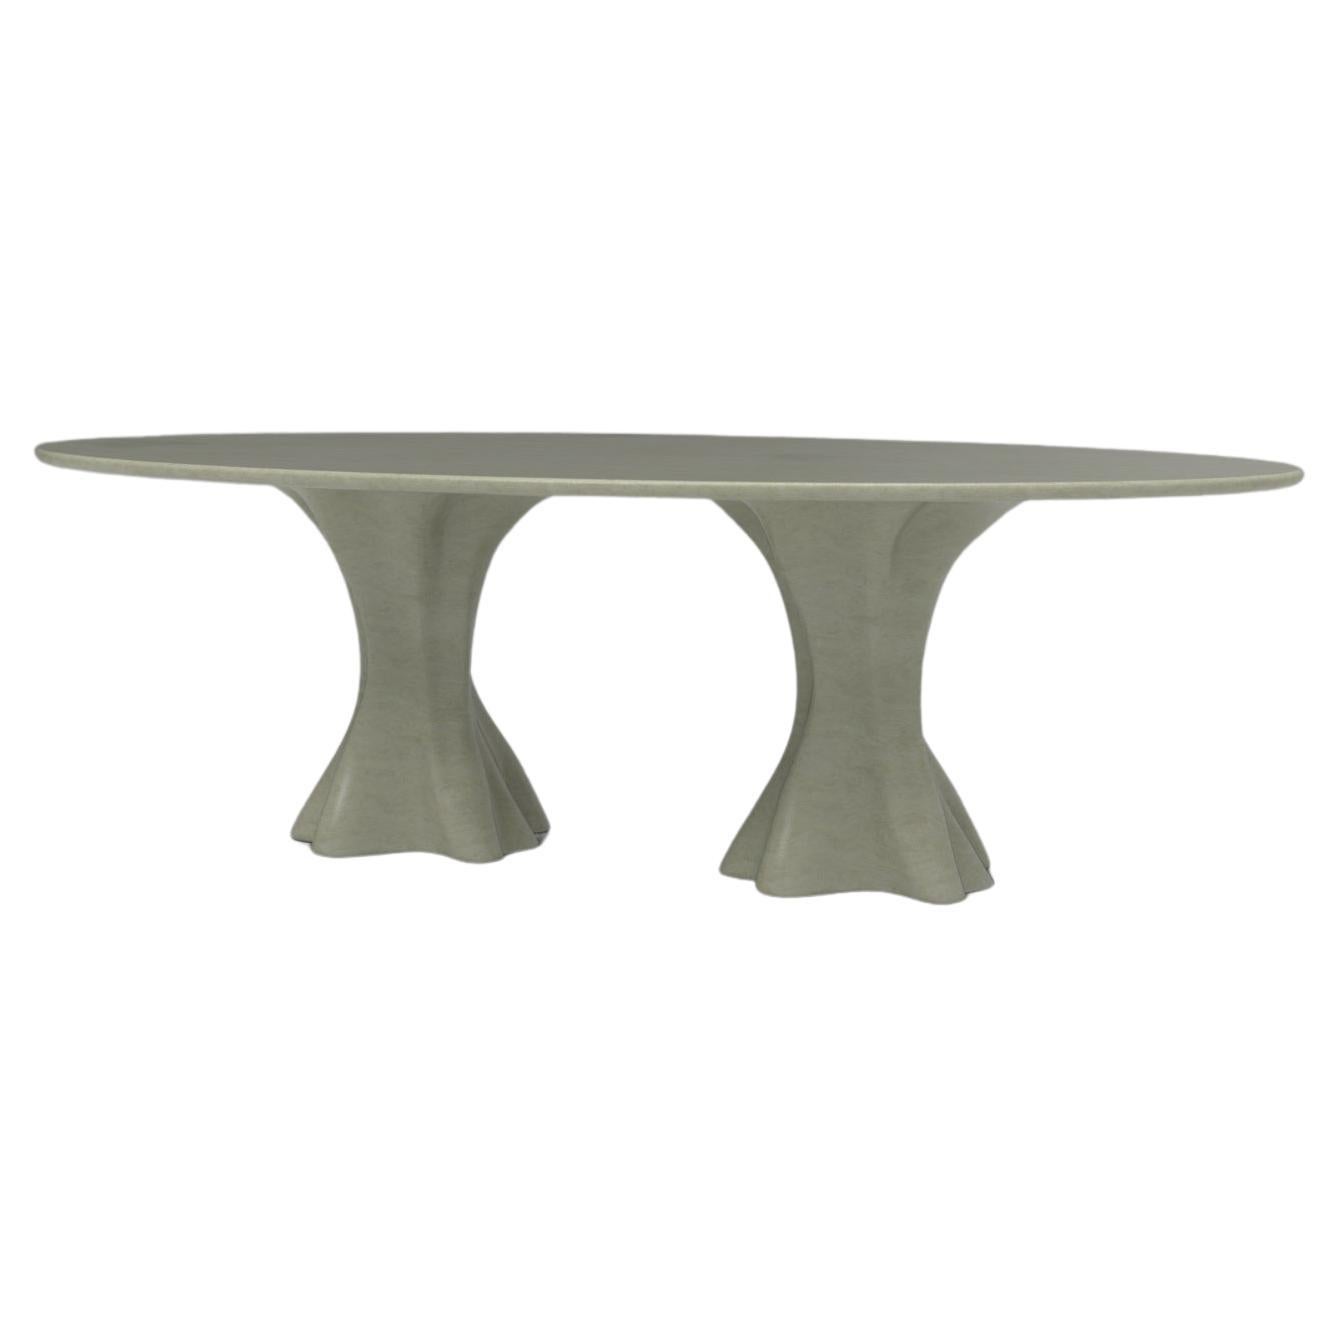 The dining table Calypso with 2 bases proves that the simplest and most genuine forms, often culminate in the most interesting pieces. Suitable for outdoor.
Top: Resin reinforced with fiberglass in natural aged fiberglass finish
Base: Resin